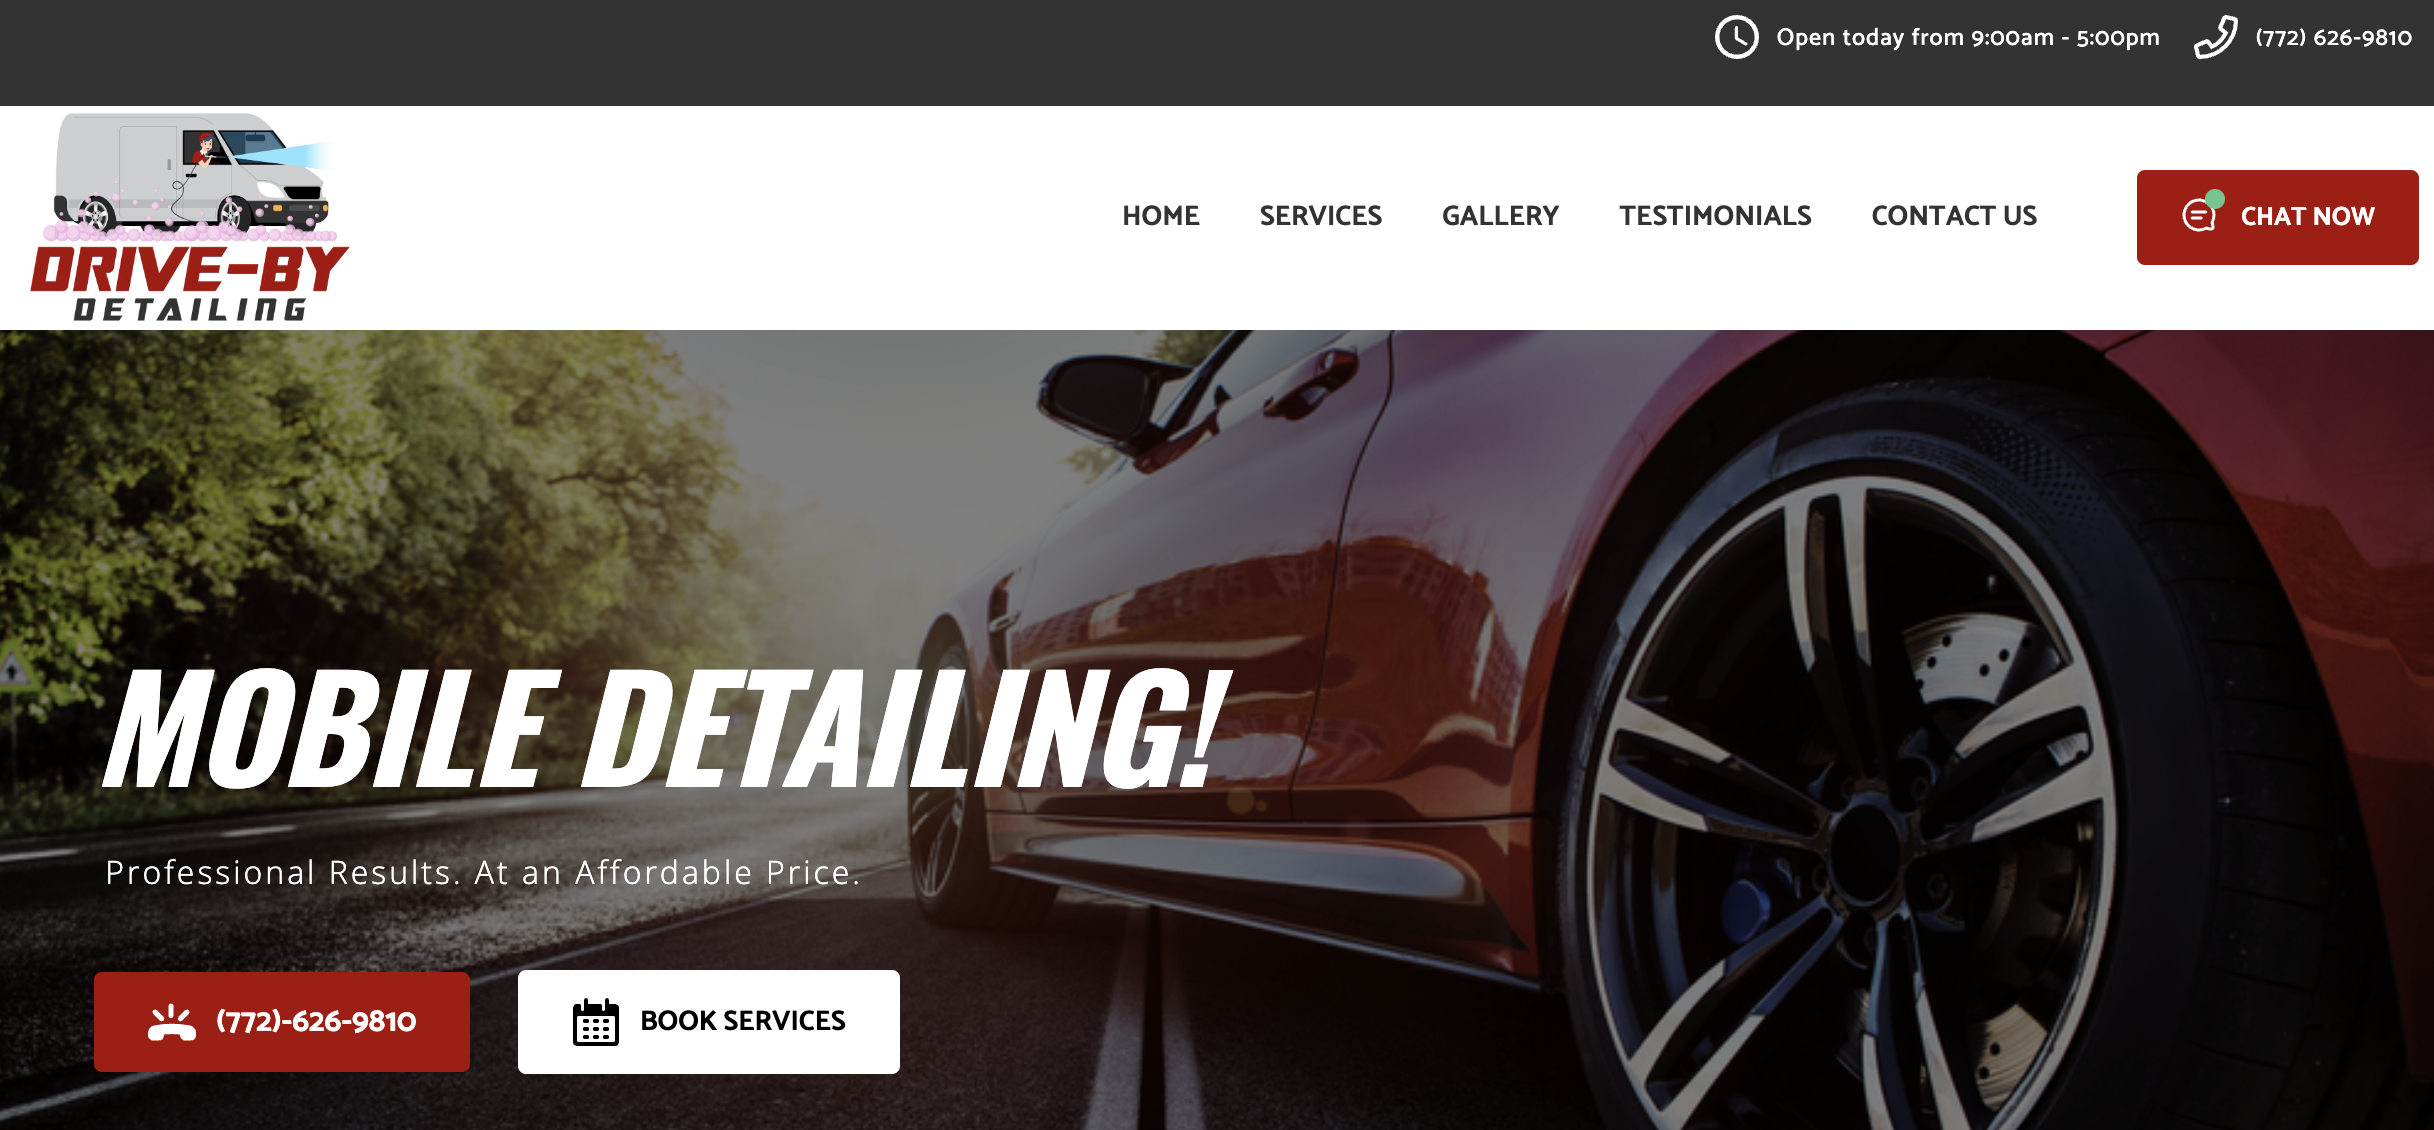 https://www.gosite.com/hs-fs/hubfs/2023%20Blogs/10%20Best%20Auto%20Detailing%20Websites/best%20auto%20detailing%20websites%20drive-bydetailing.com.png?width=2434&height=1130&name=best%20auto%20detailing%20websites%20drive-bydetailing.com.png